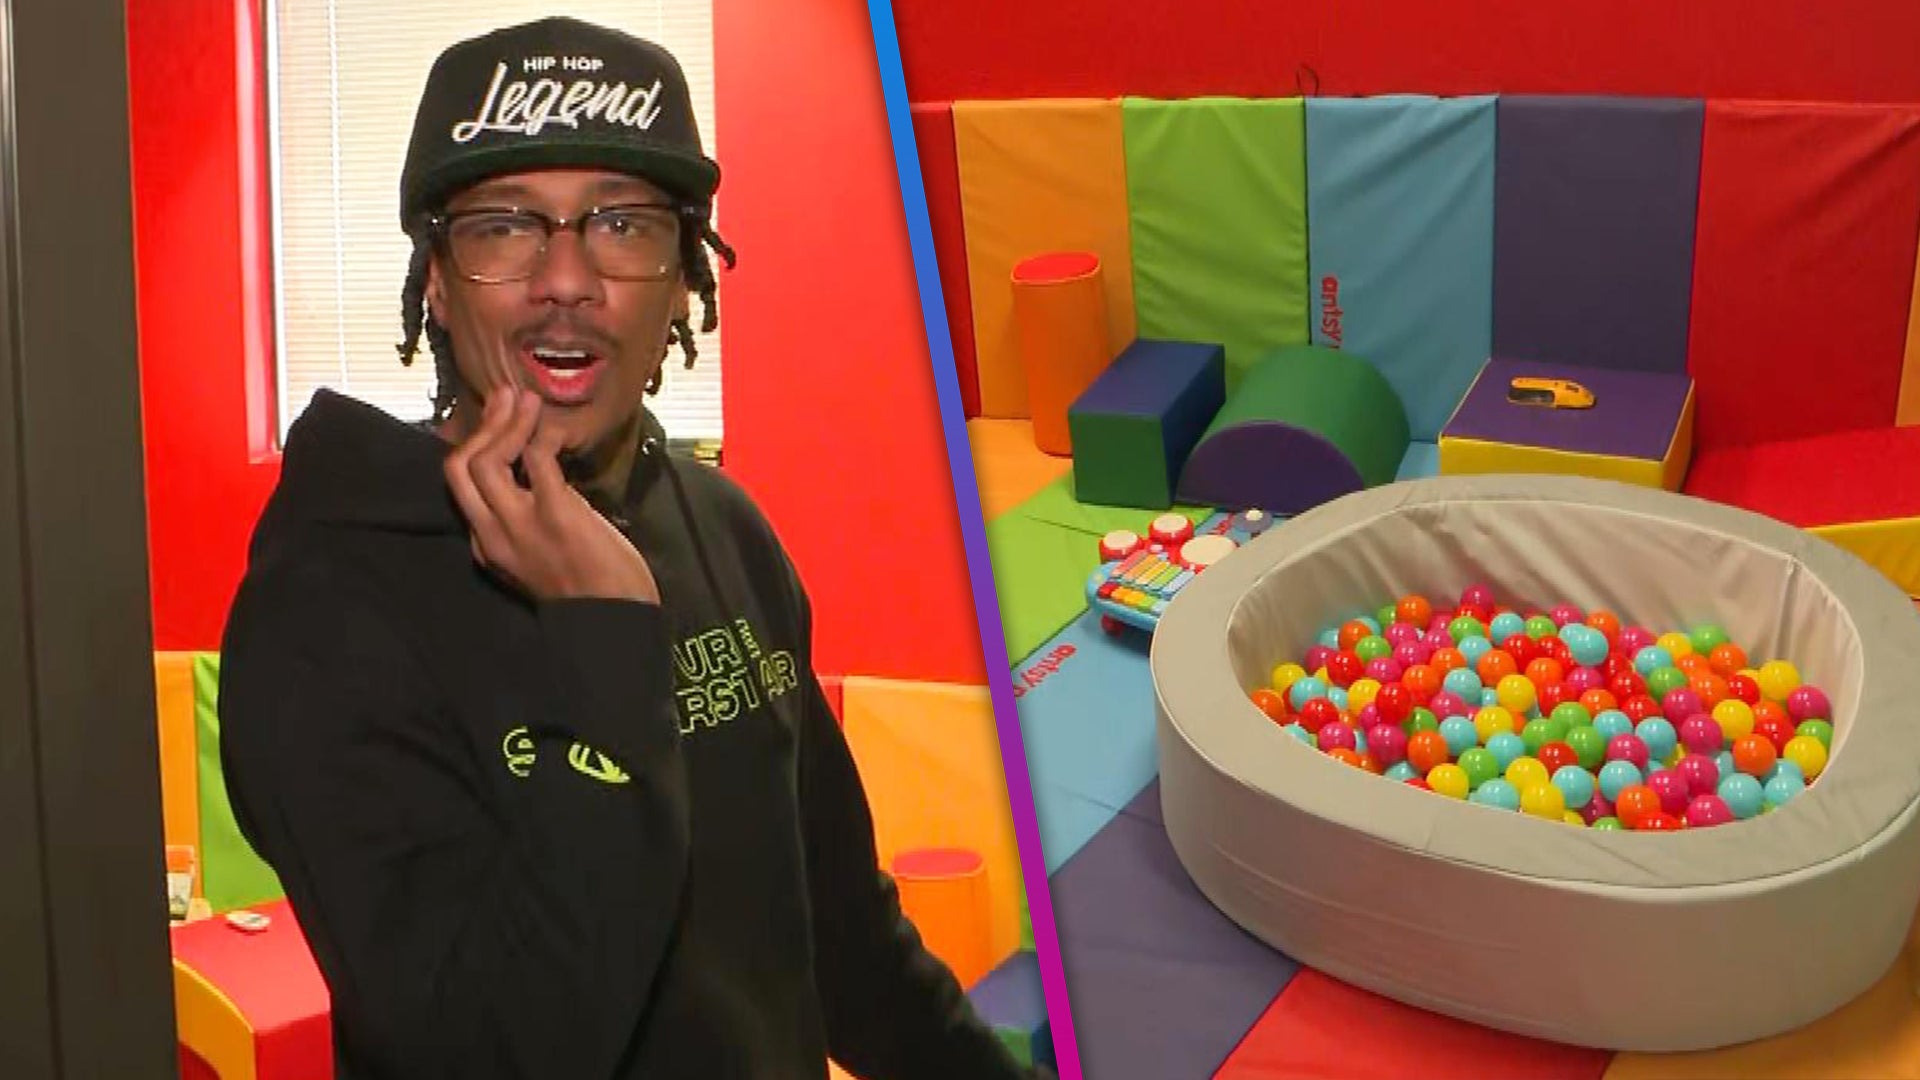 23 Reasons To Watch Nick Cannon's Daytime Talk Show